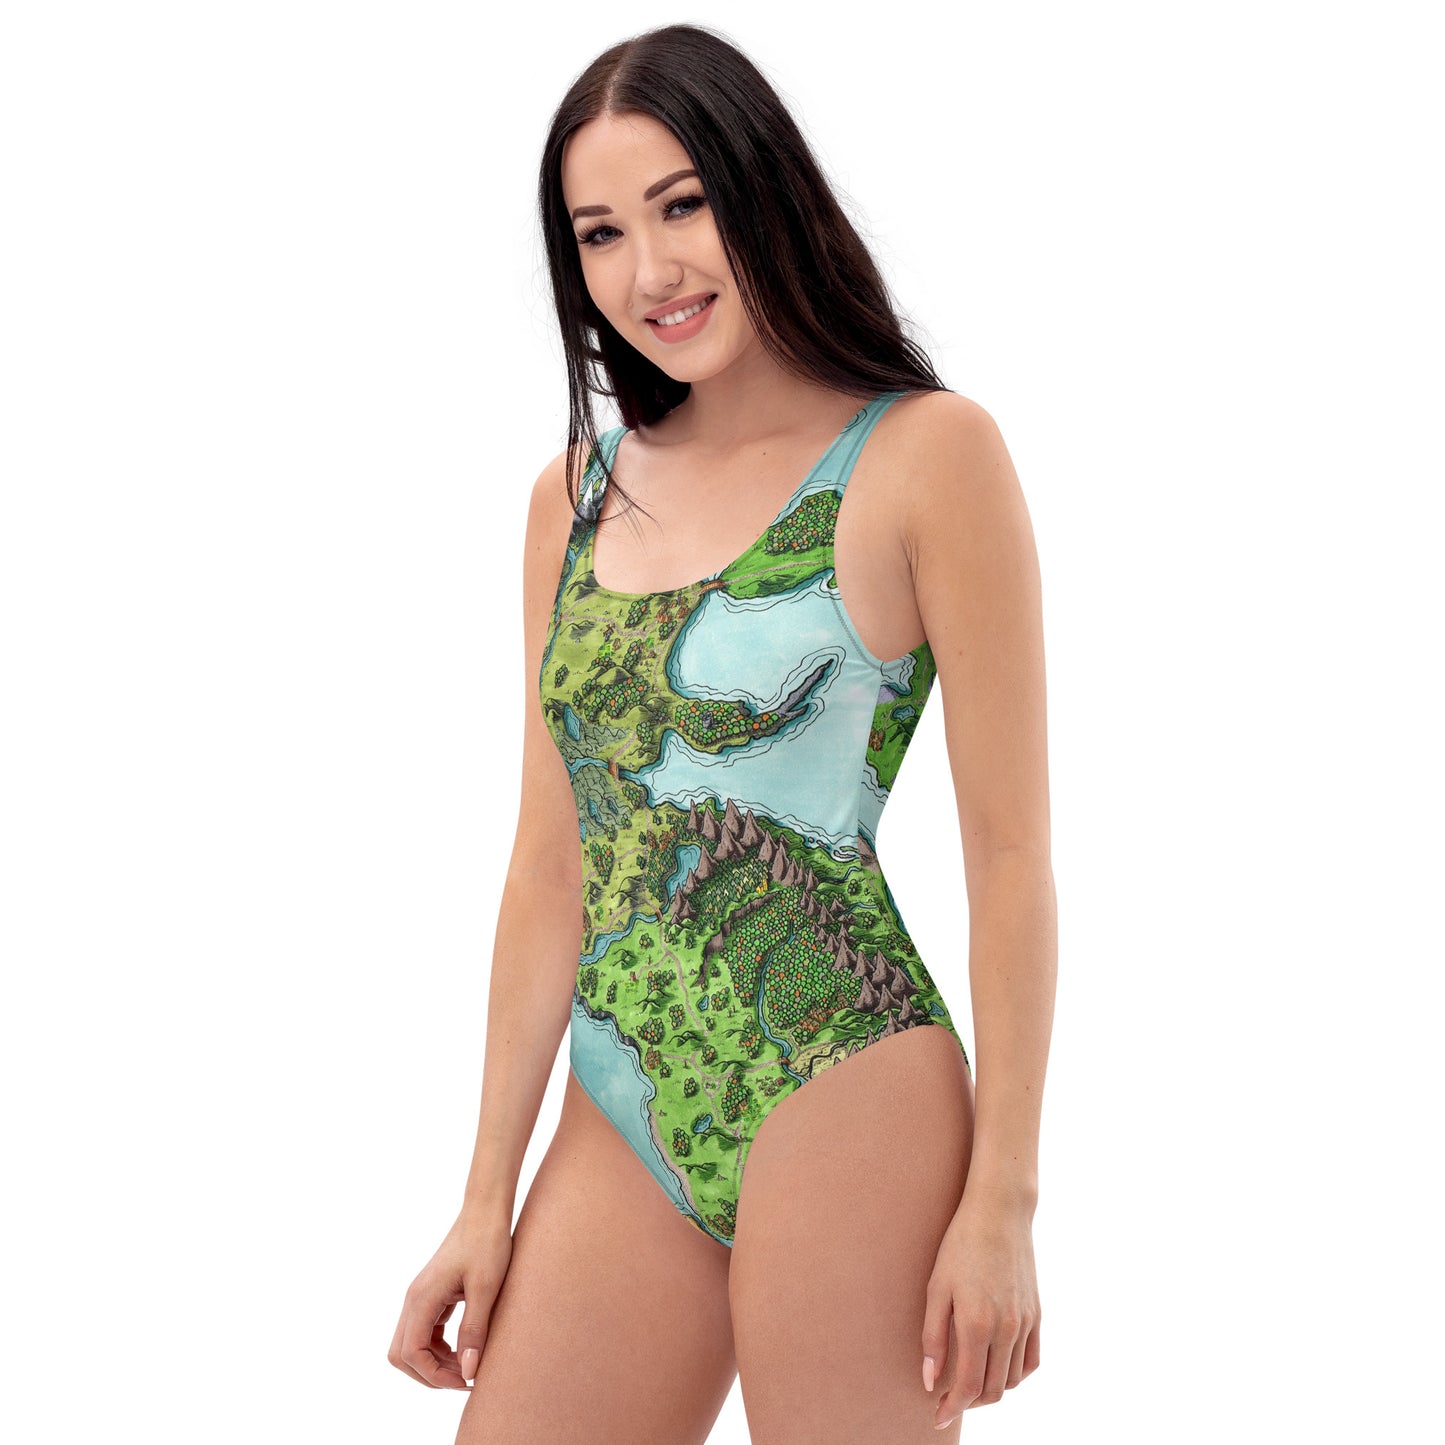 A model wears the Euphoros one piece swimsuit by Deven Rue, left view.